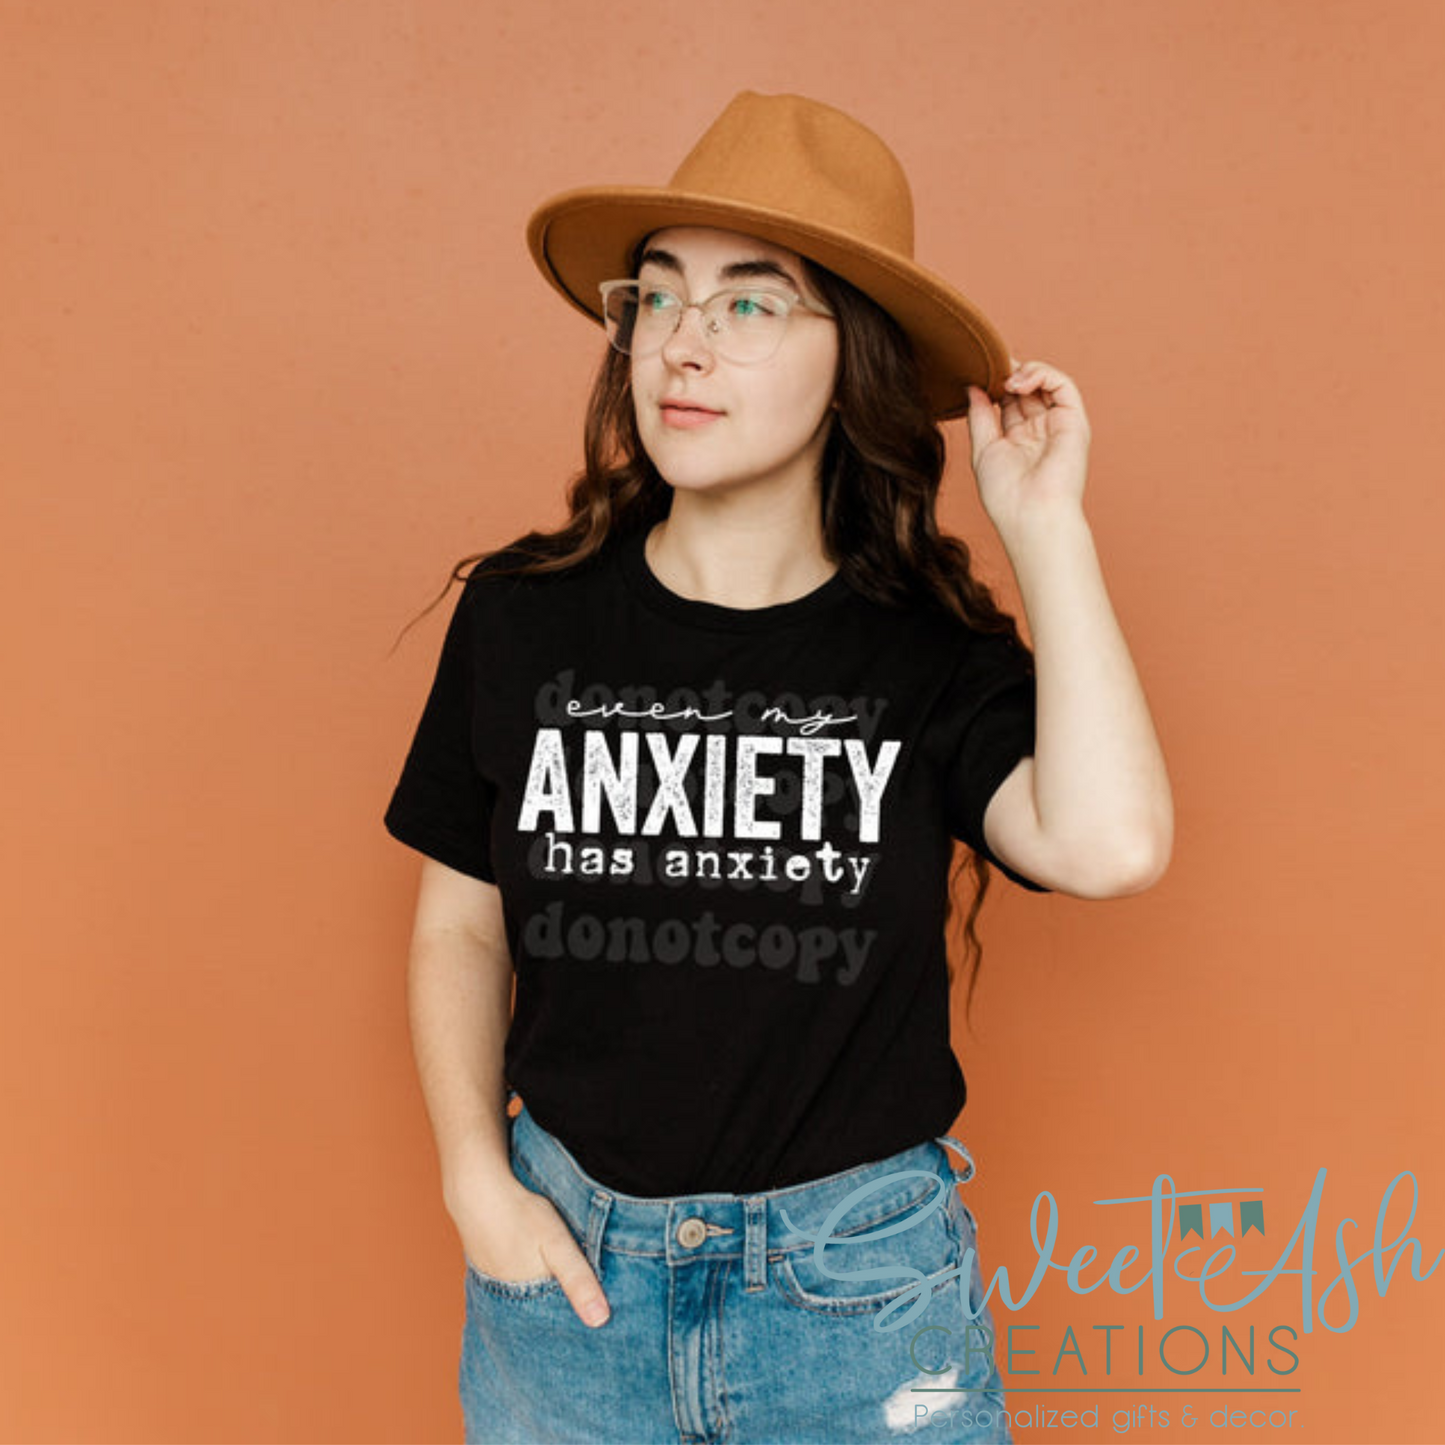 Even My Anxiety Has Anxiety T-Shirt